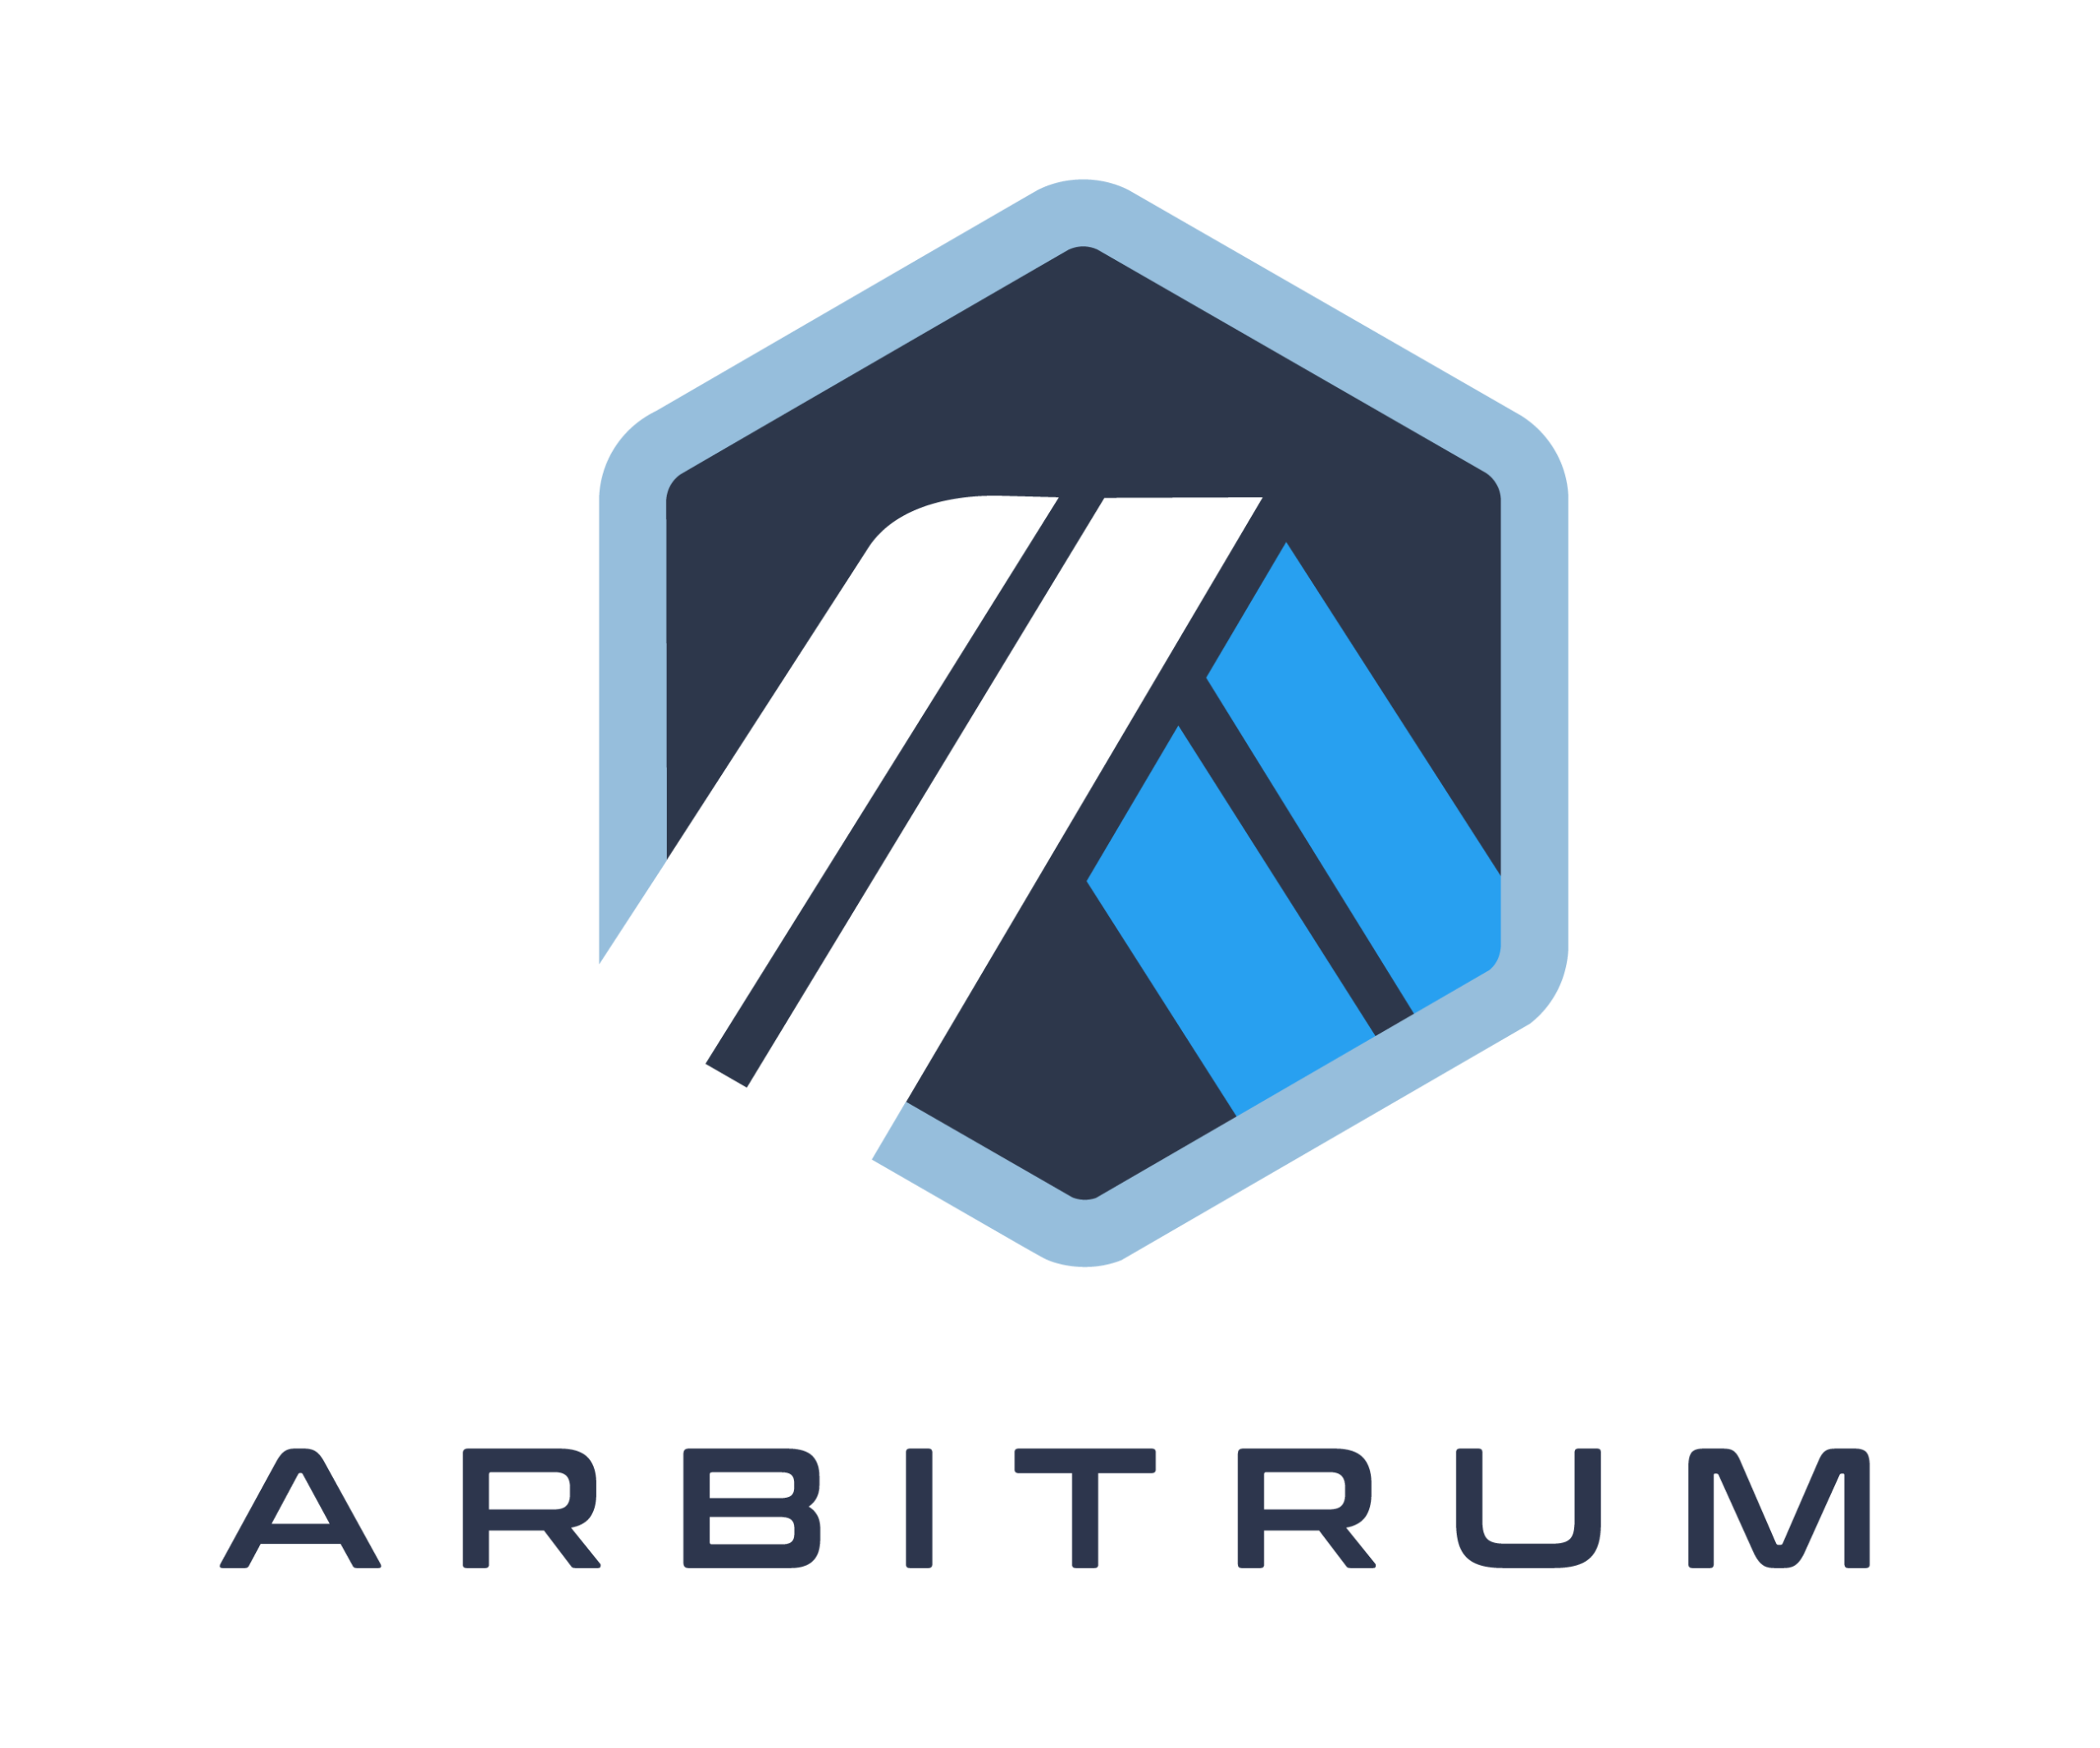 Benefits of the Arbitrum Blockchain and Why You Might Want to Consider Using It